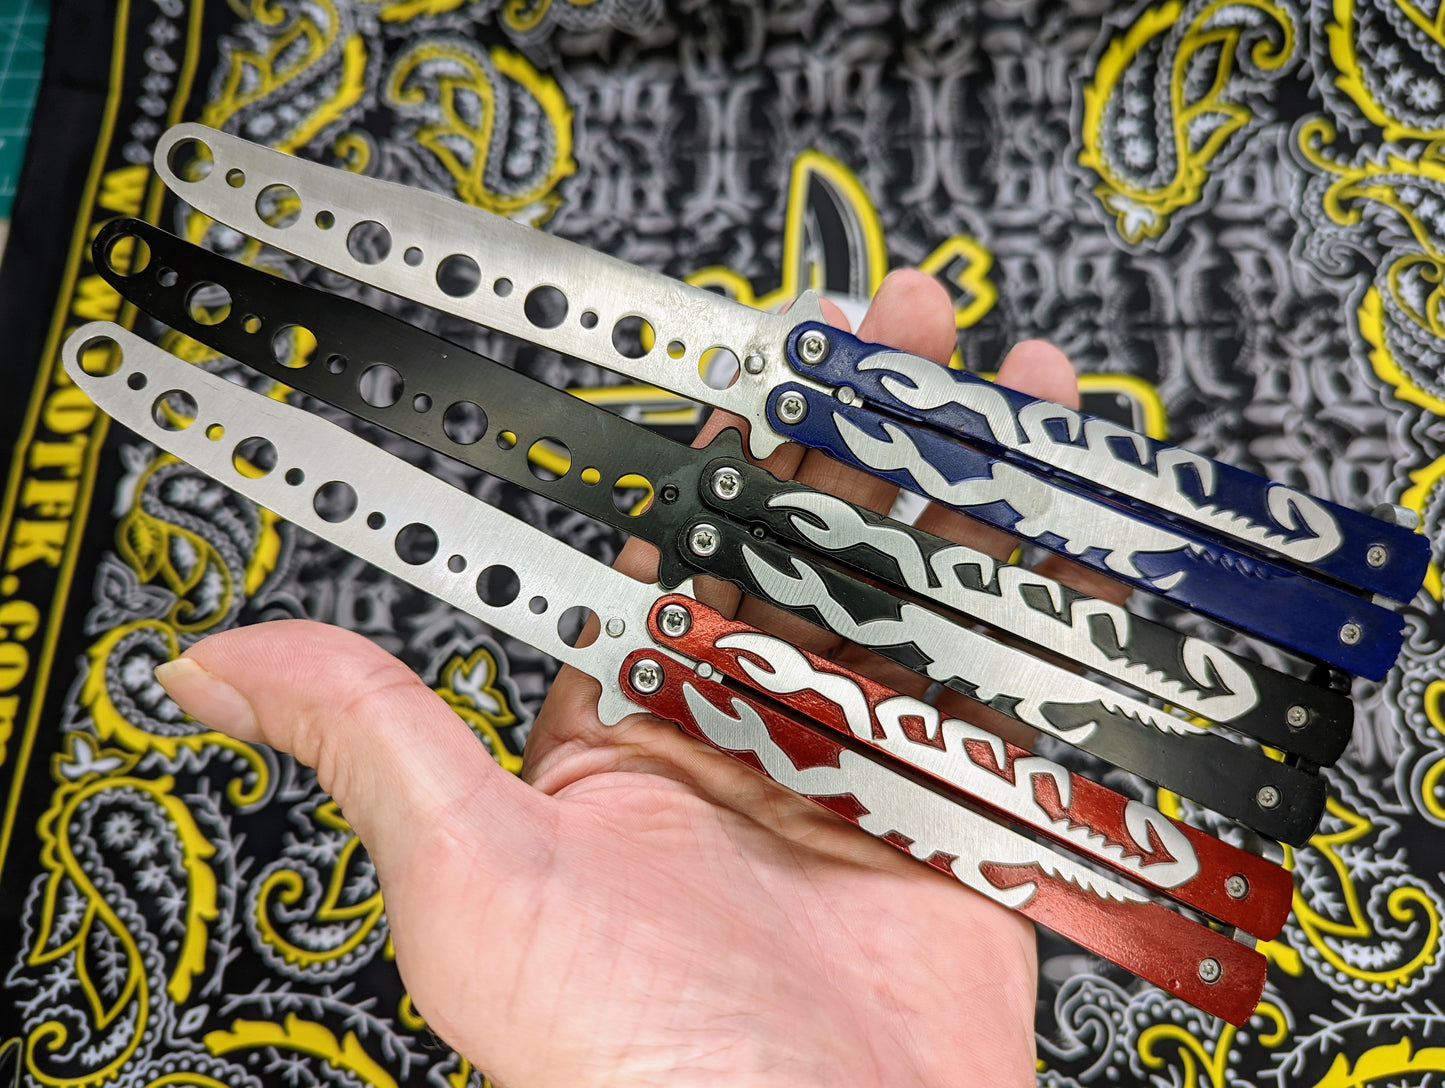 Red Scorpion Balisong Trainer